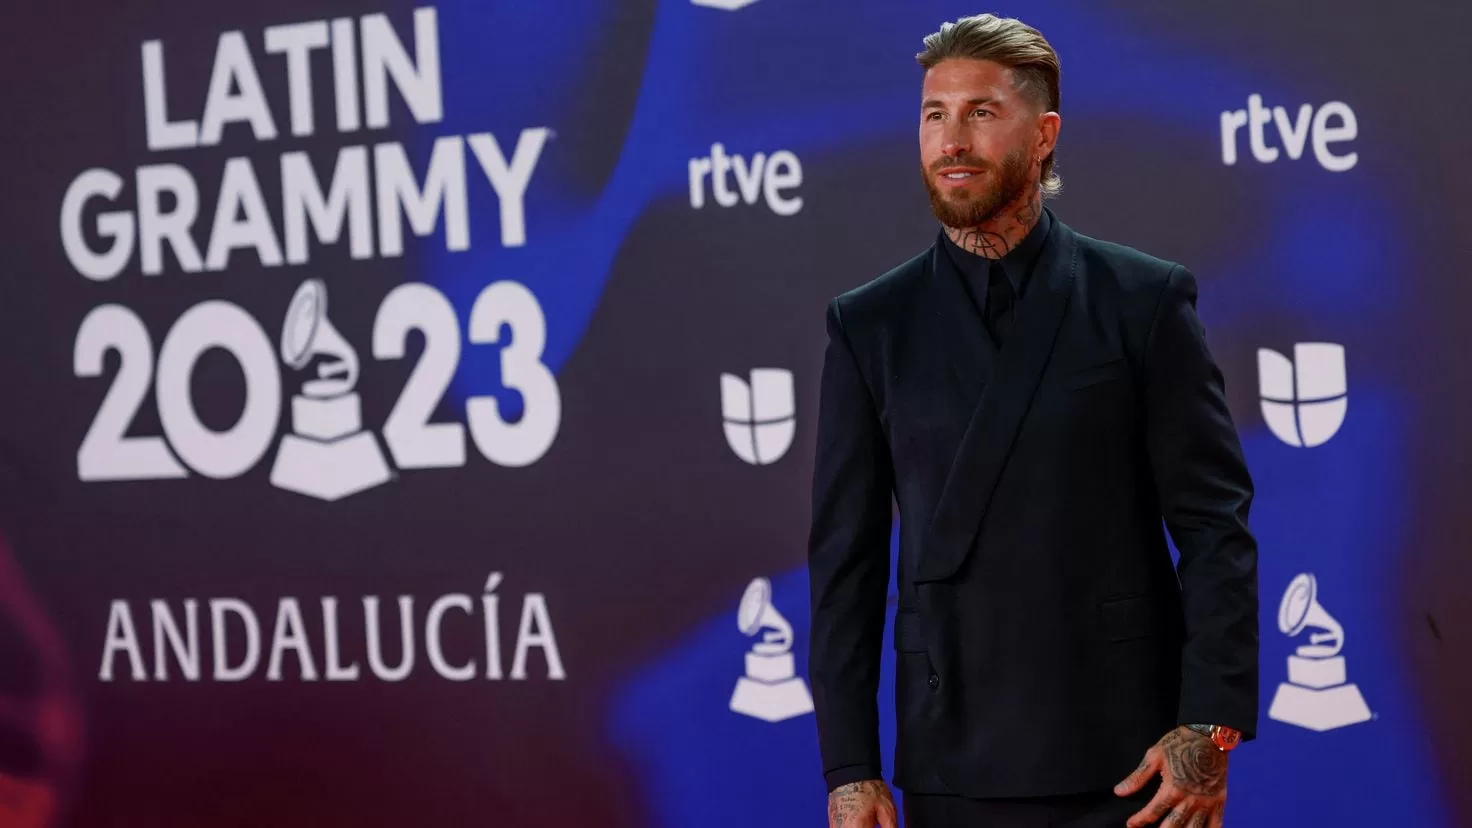 Pilar Rubio leaves Sergio Ramos alone at the Latin Grammy 2023: an absence much commented on in networks
